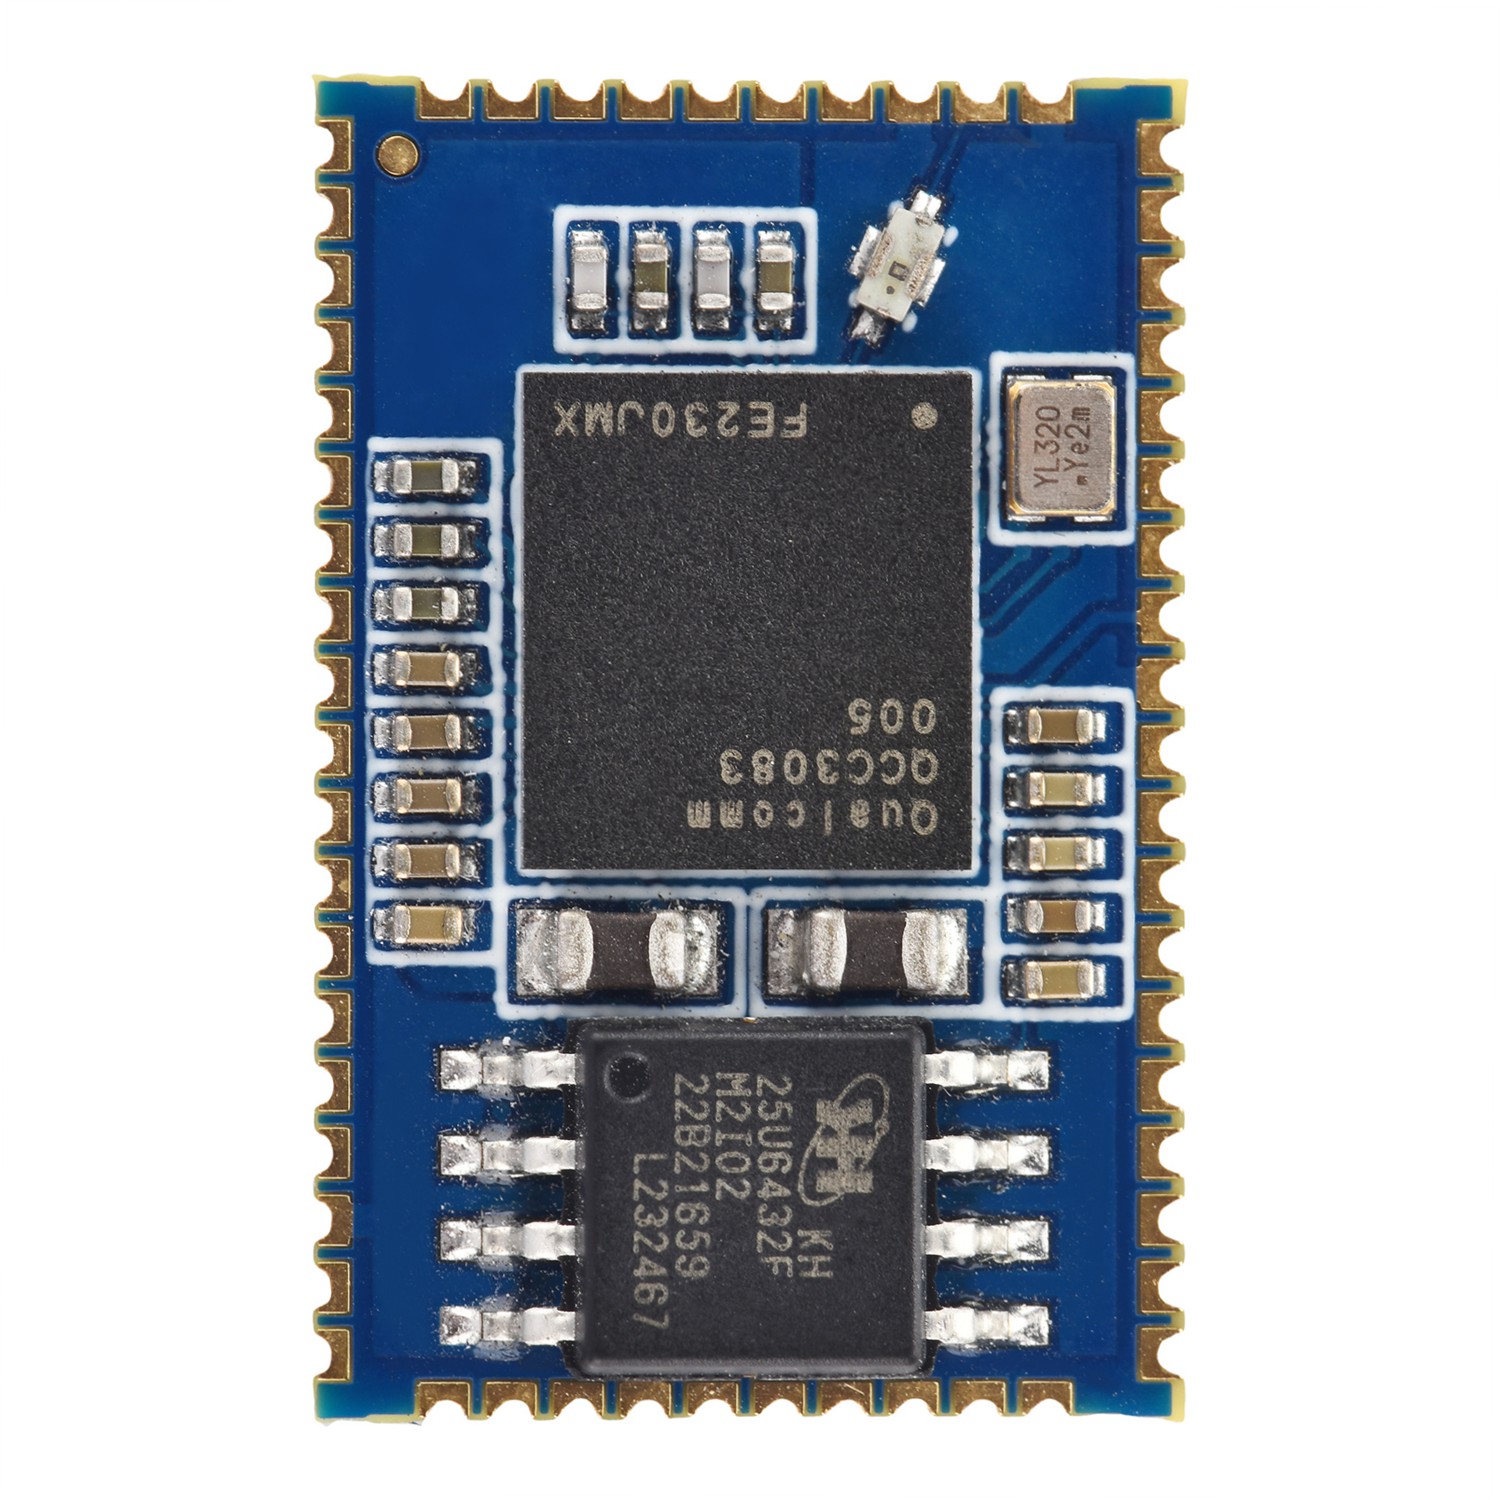 Introduction to BTM383 (QCC3083) Bluetooth module